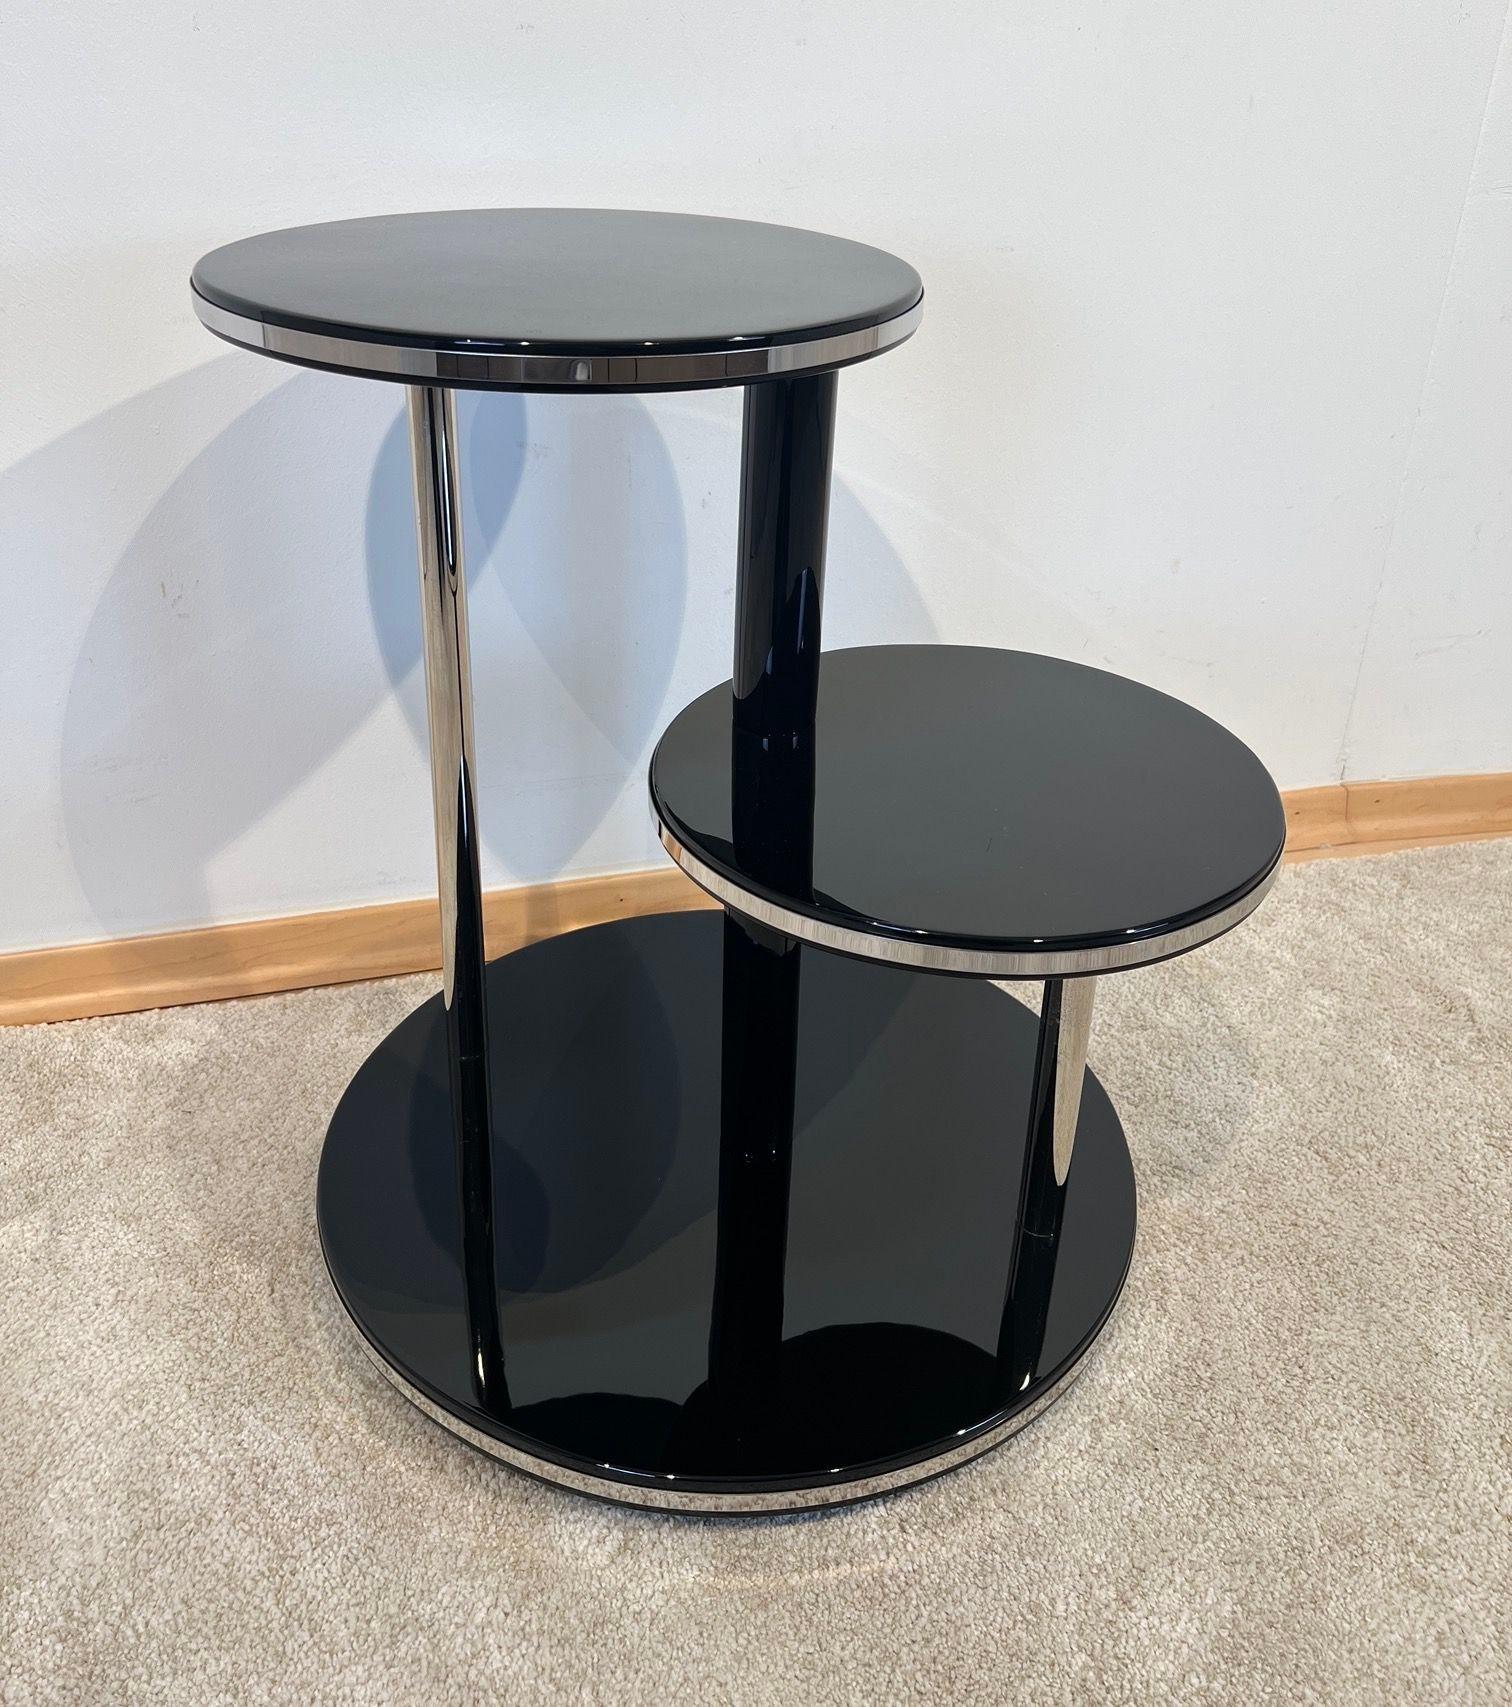 Art Deco Round Side Table, Black Lacquer, Chrome, Metal Trims, France circa 1930 For Sale 8